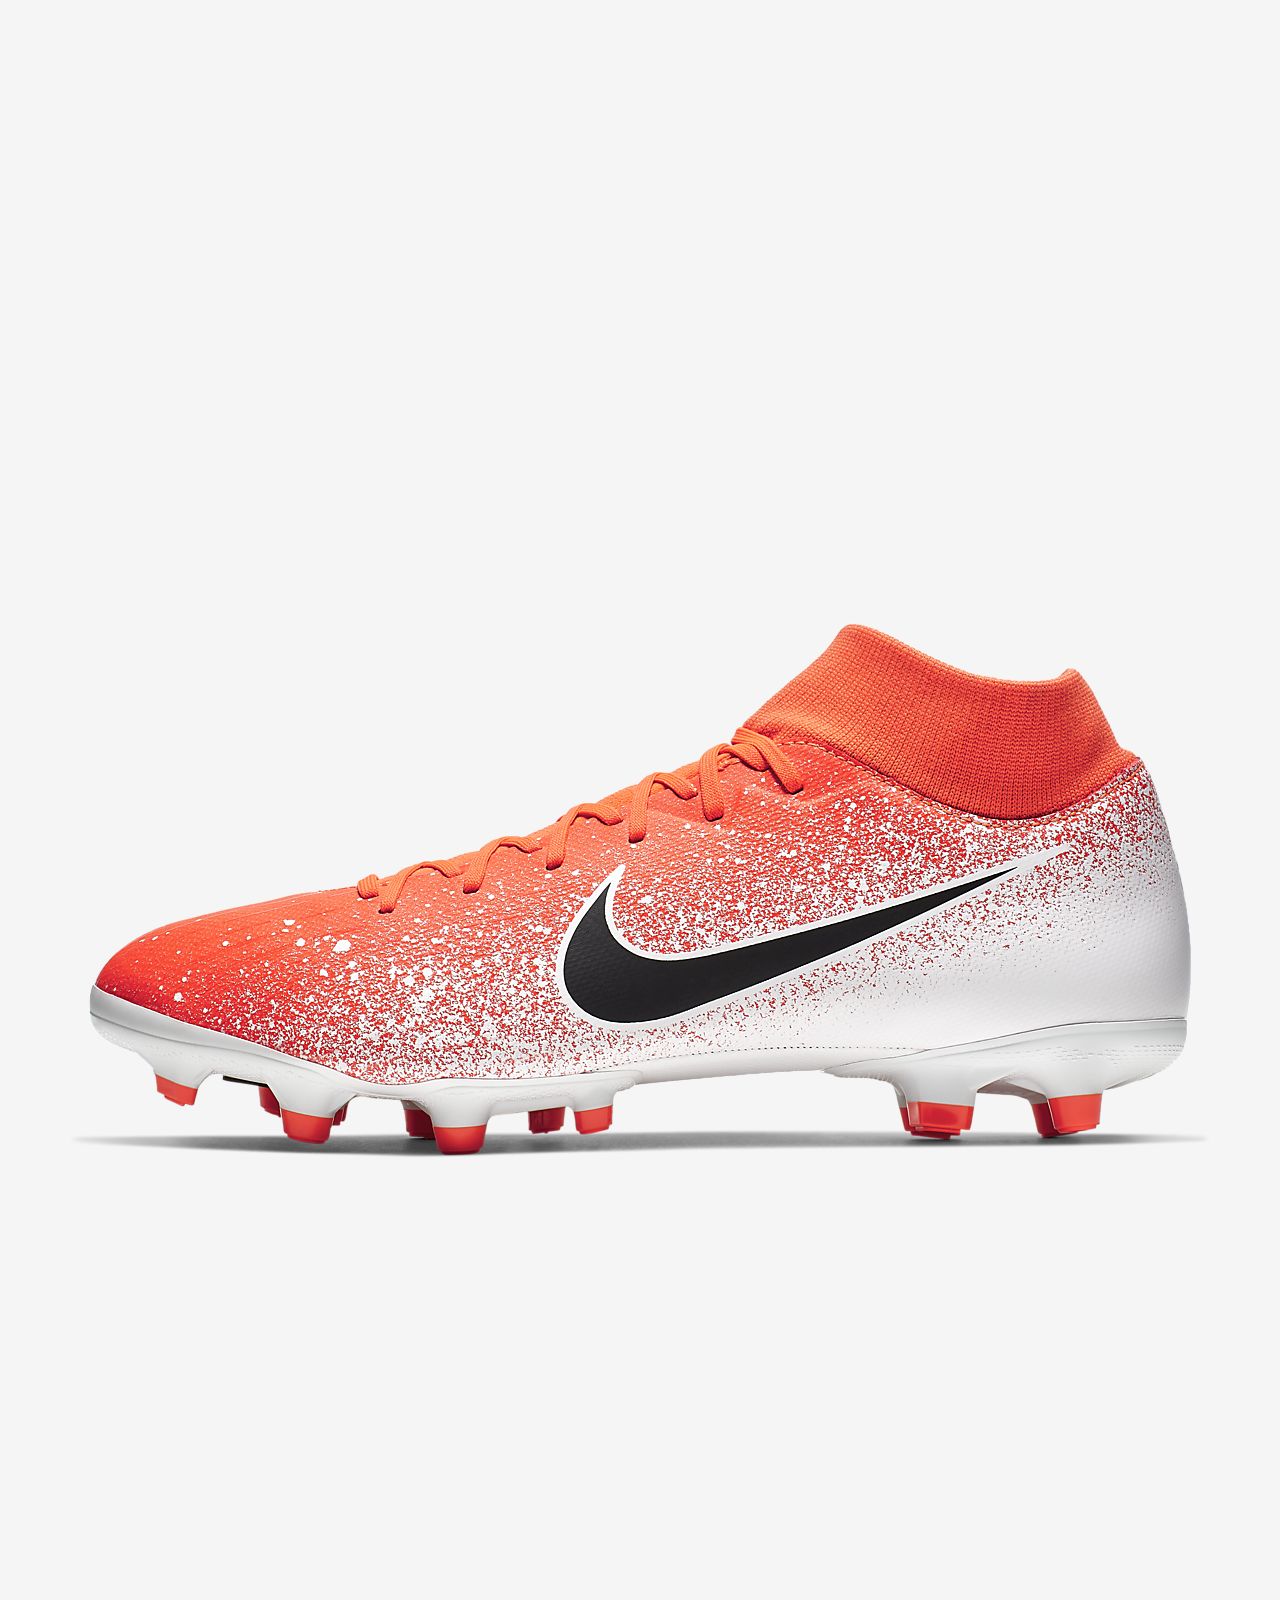 nike mercurial superfly 6 club mg soccer cleats review